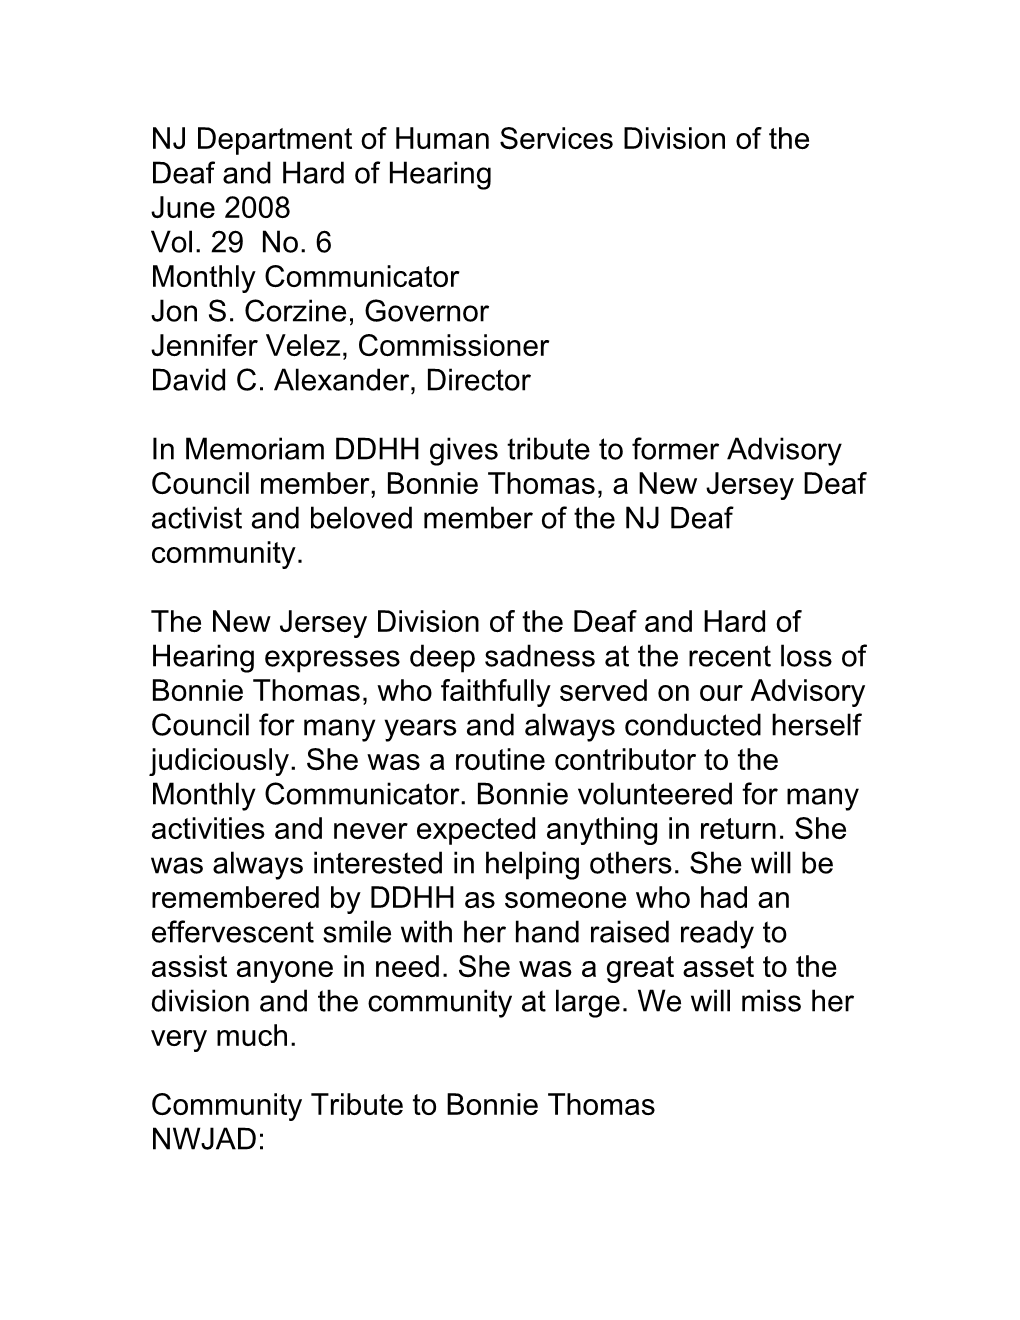 In Memoriam DDHH Gives Tribute to Former Advisory Council Member, Bonnie Thomas, a New